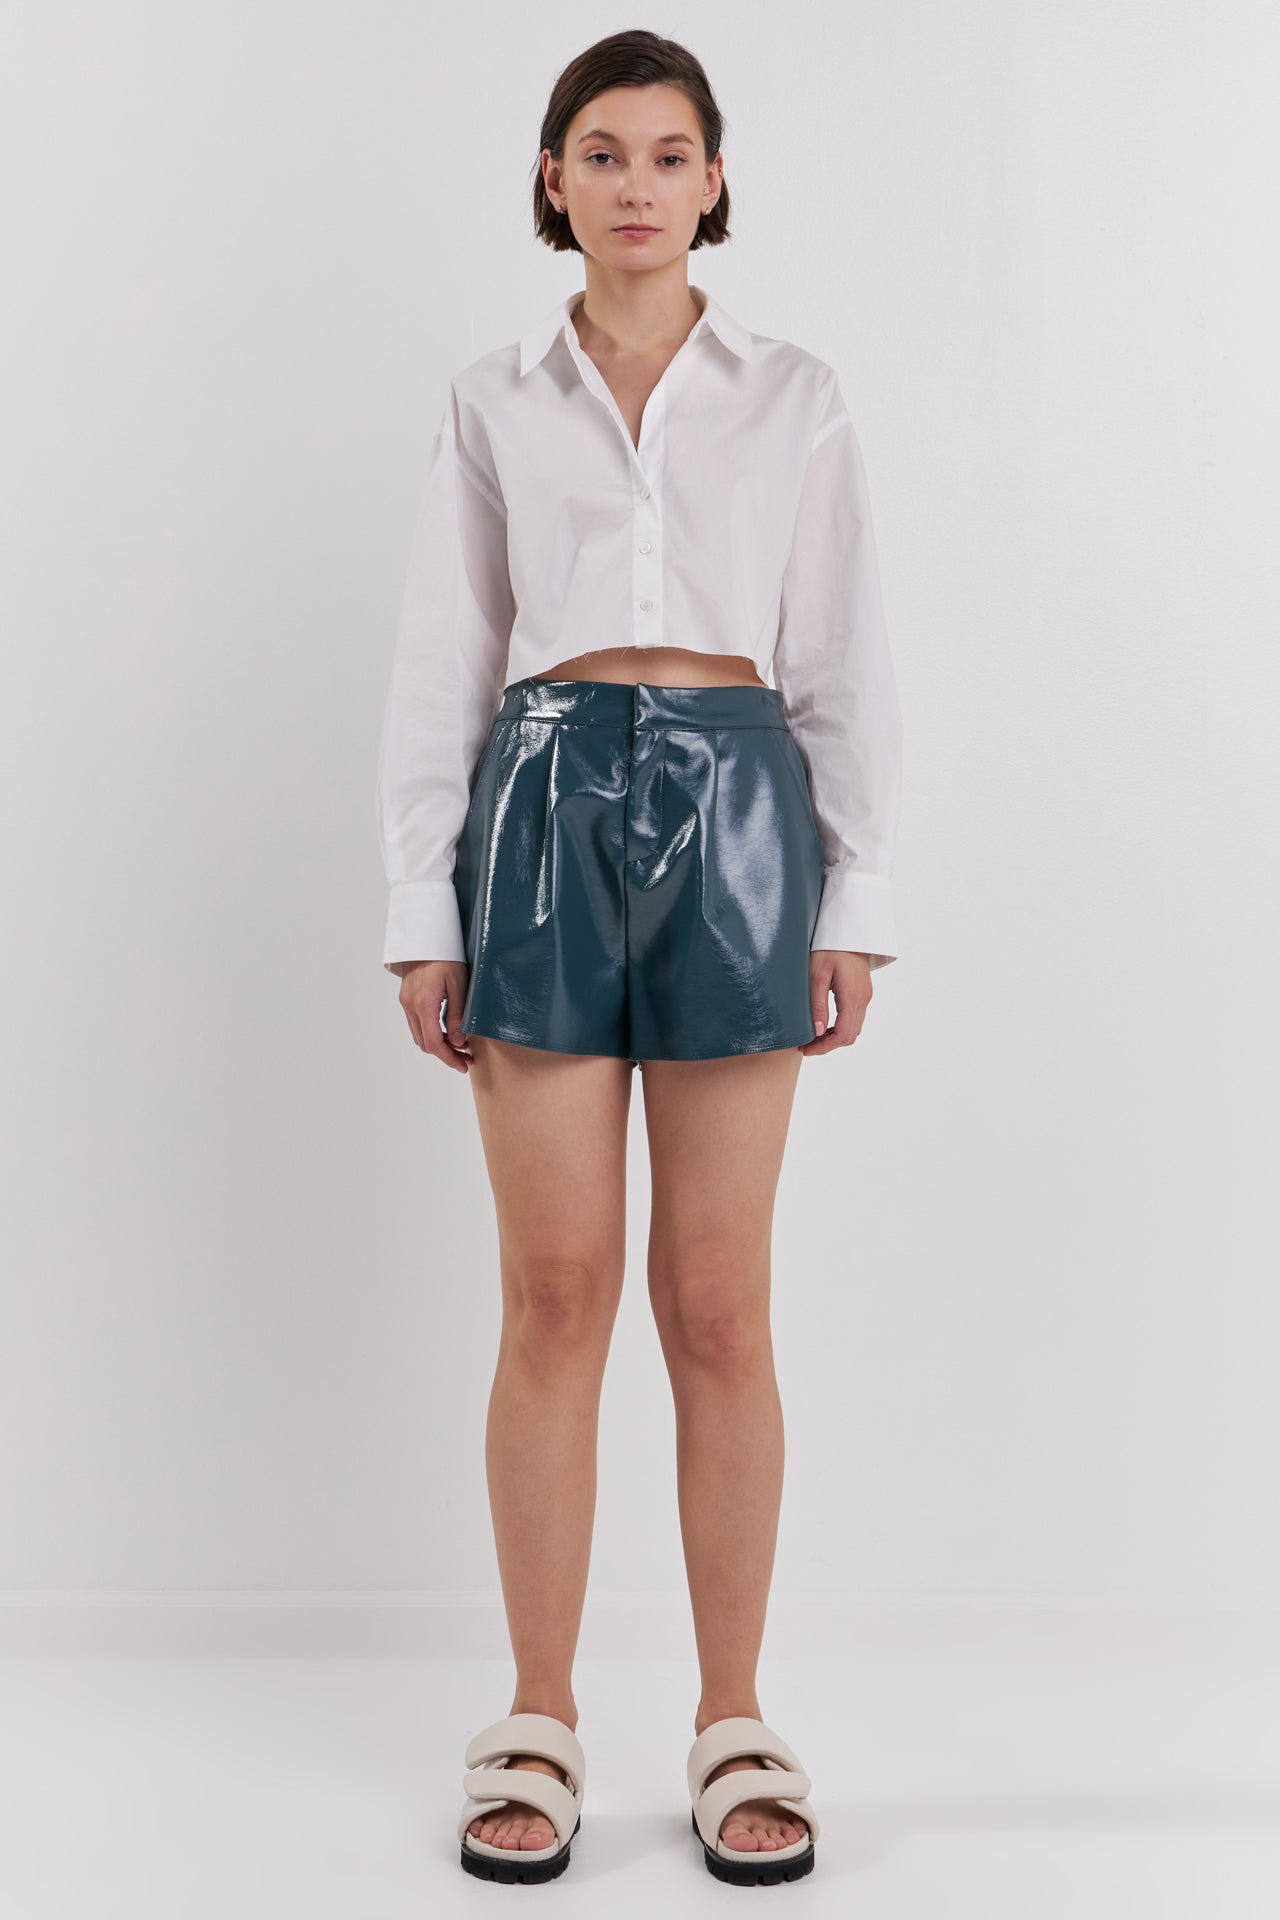  HGps8w Women's High Waisted Faux Leather Shorts